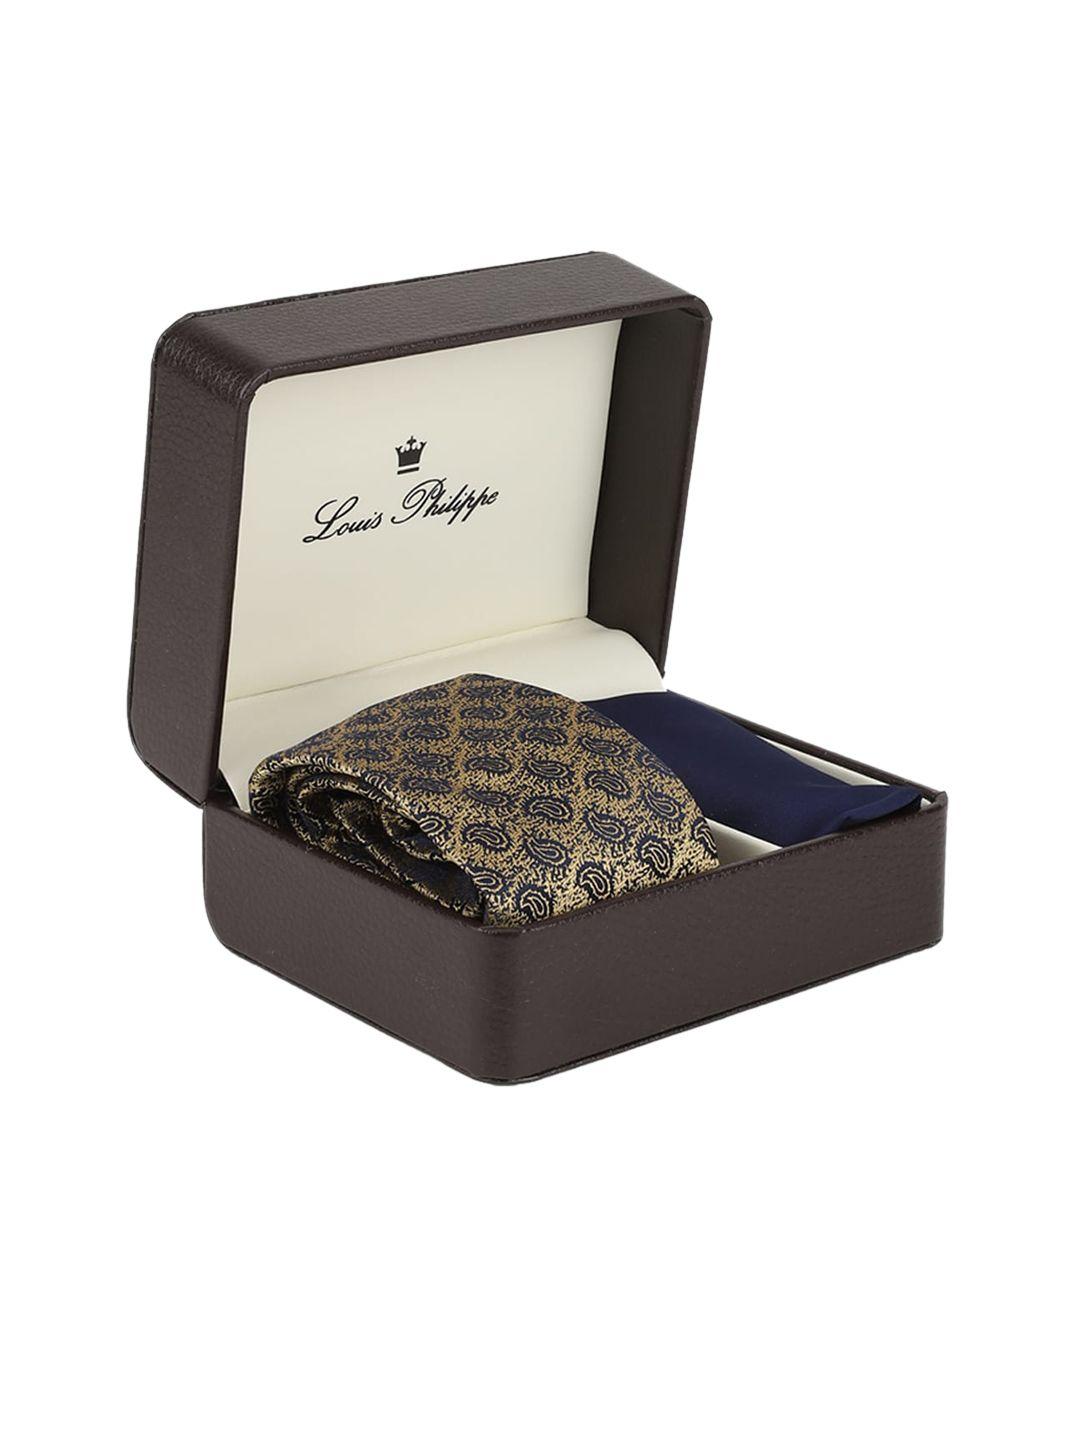 louis philippe men yellow & navy blue printed accessory gift set